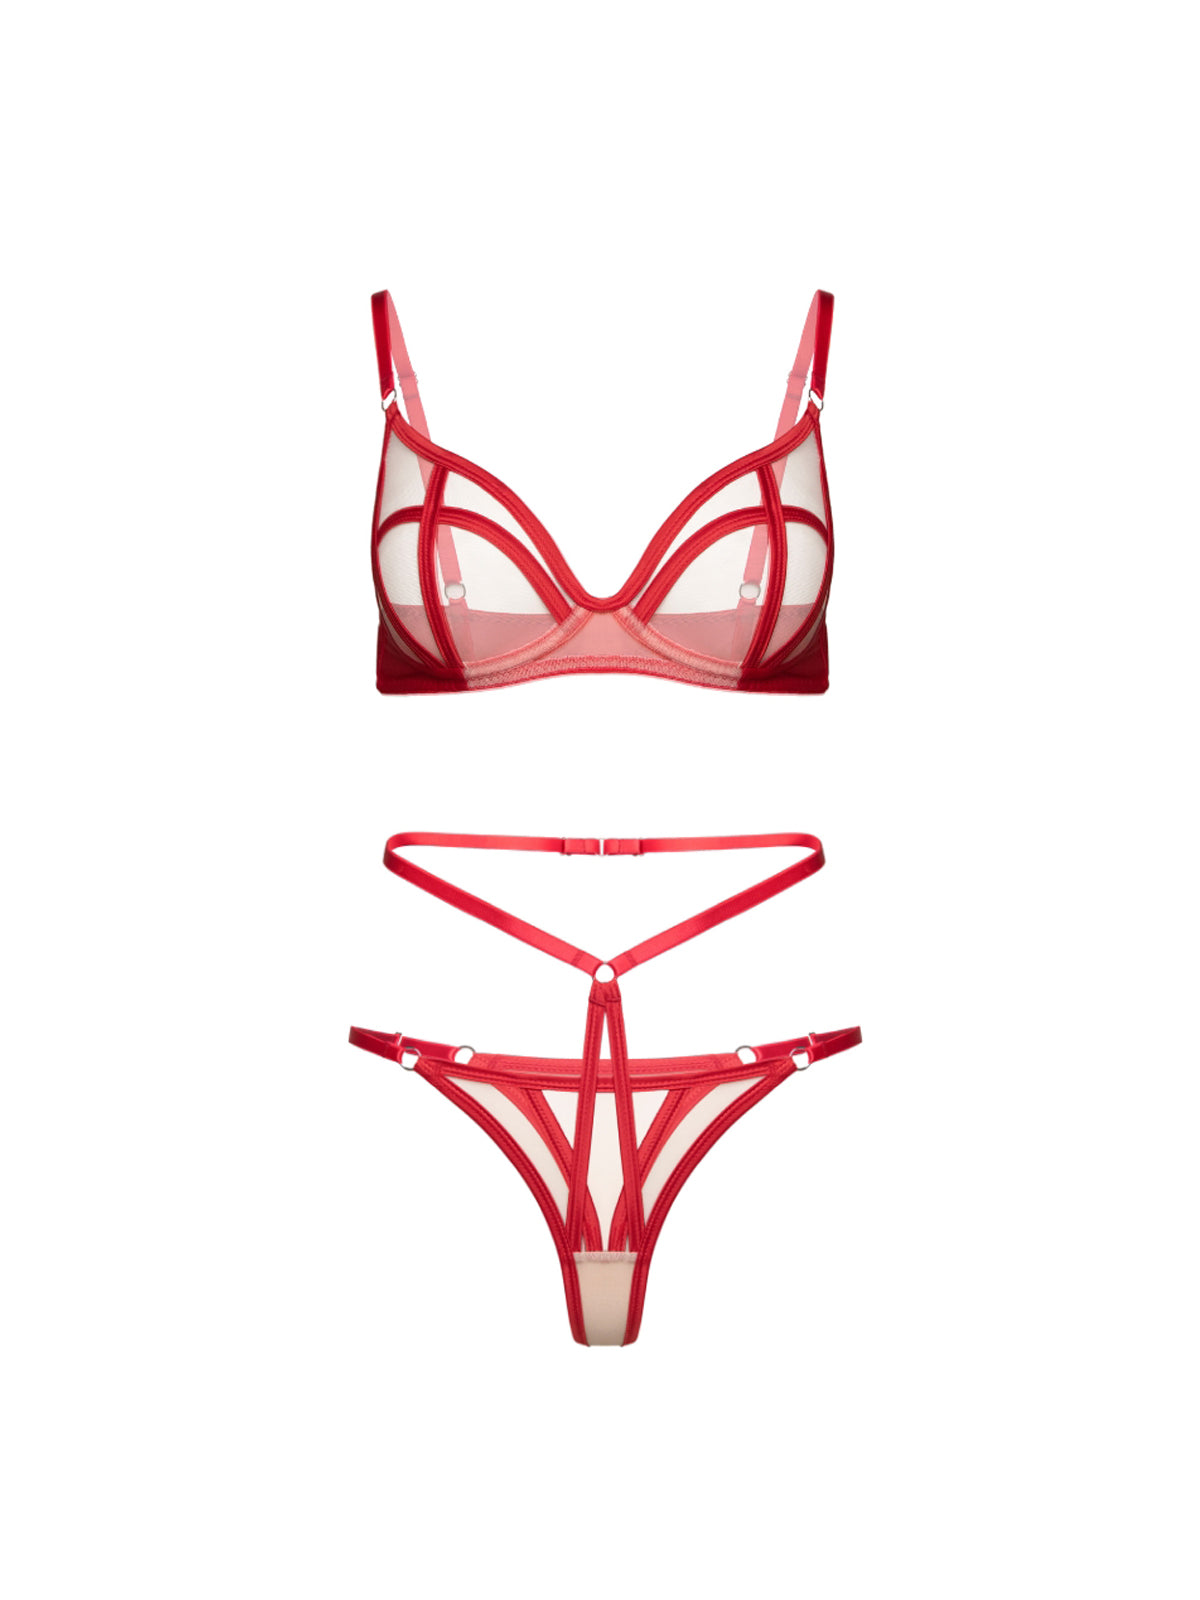 Candie Lingerie Set in Red